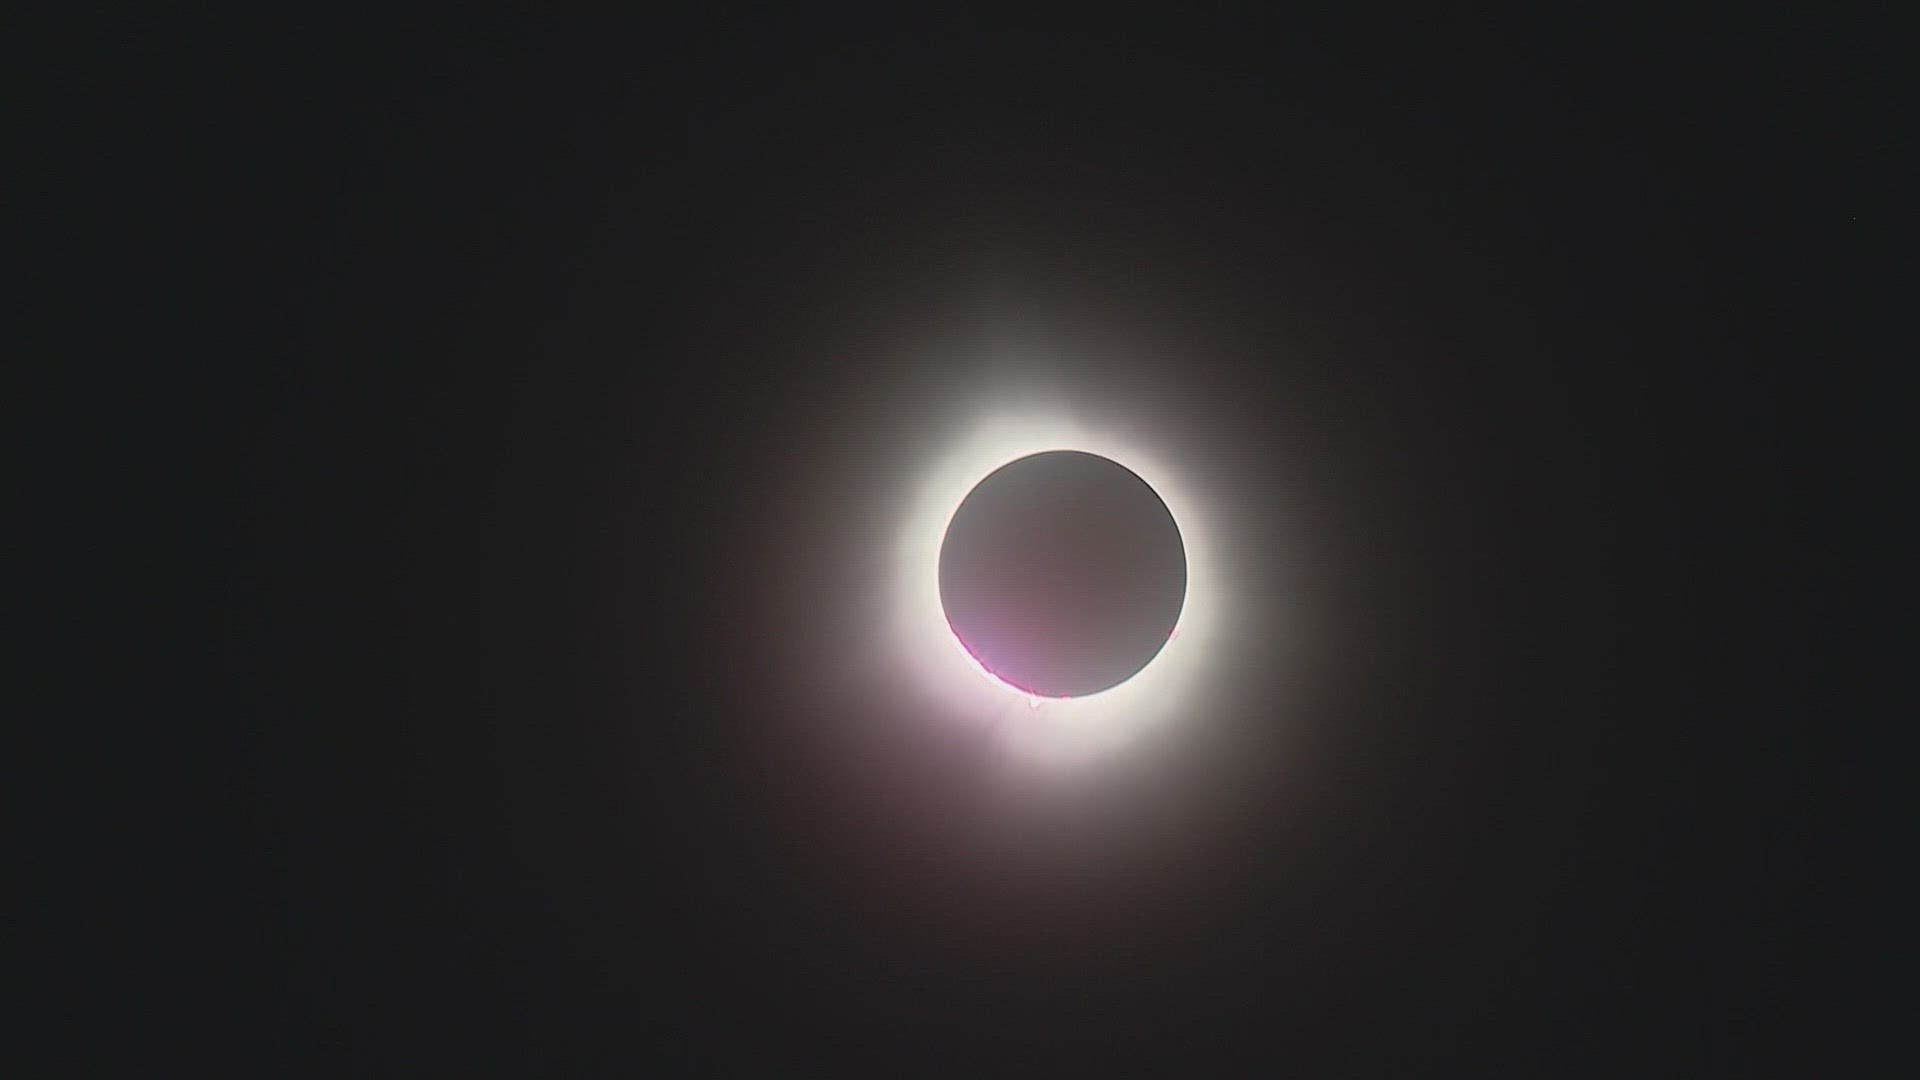 Millions of people watched as a total solar eclipse moved through Ohio on Monday.